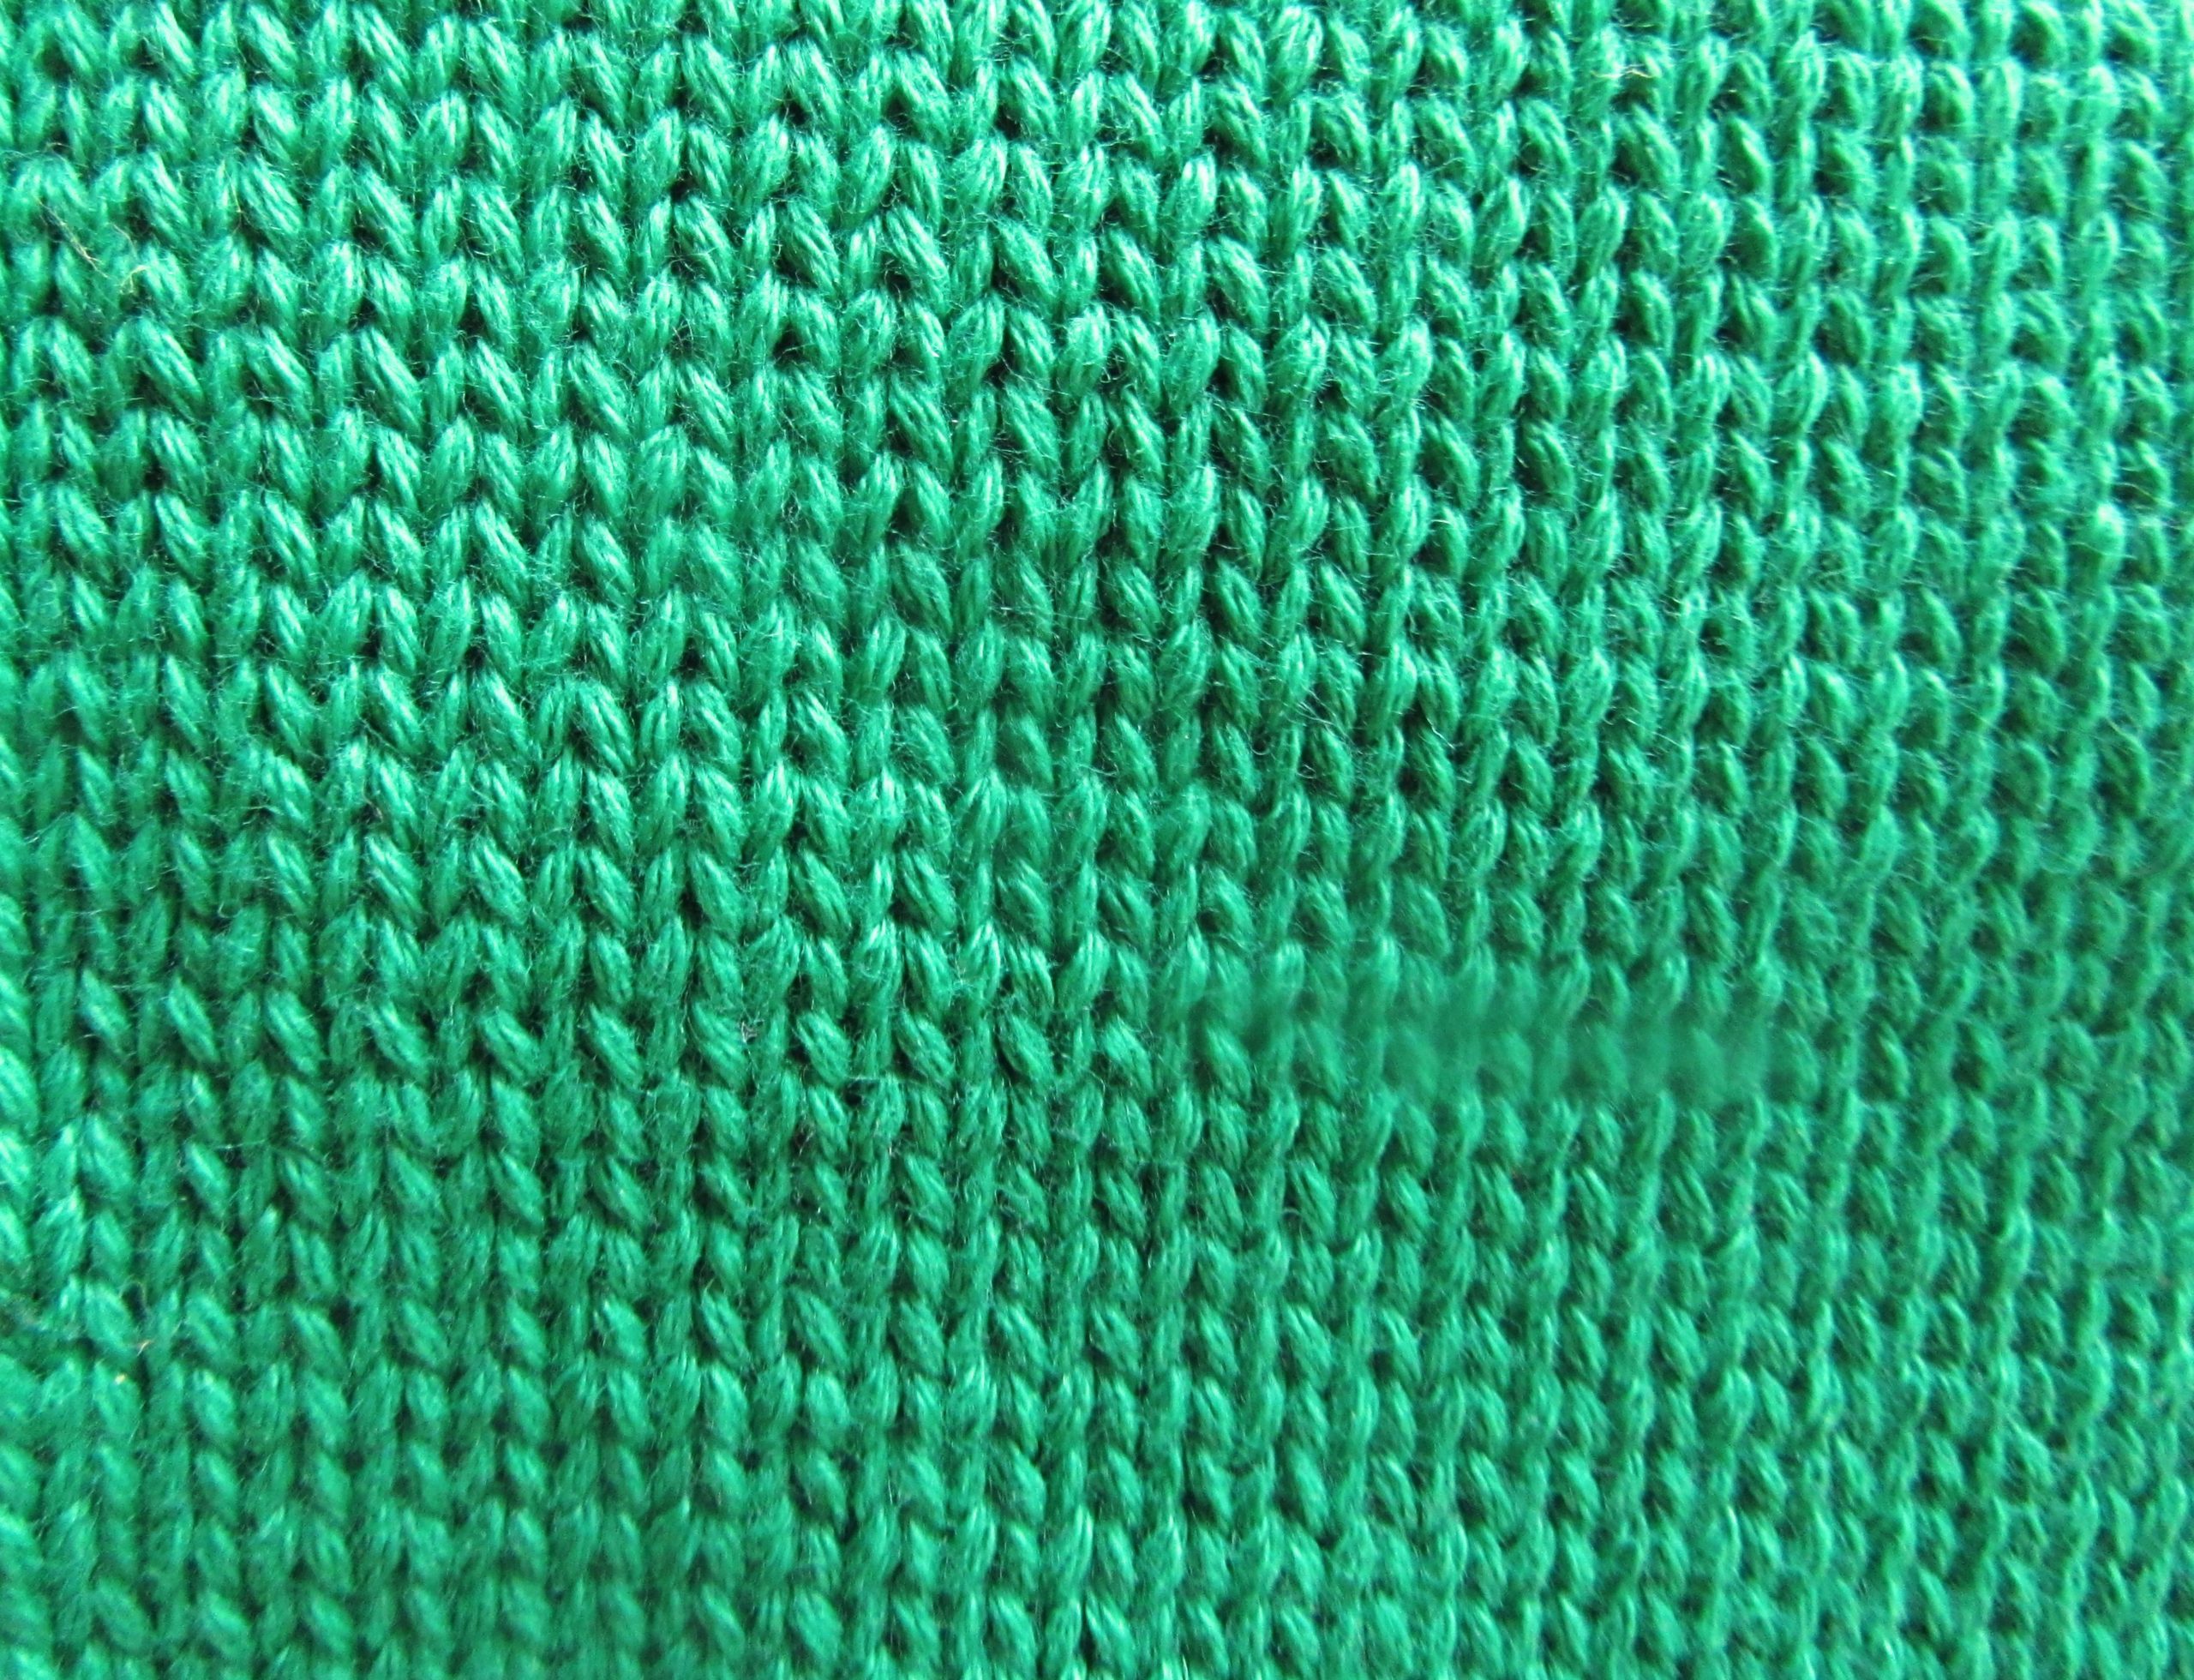 https://itchinforsomestitchin.com/woven-knit-fabric-differences/knit-fabric/